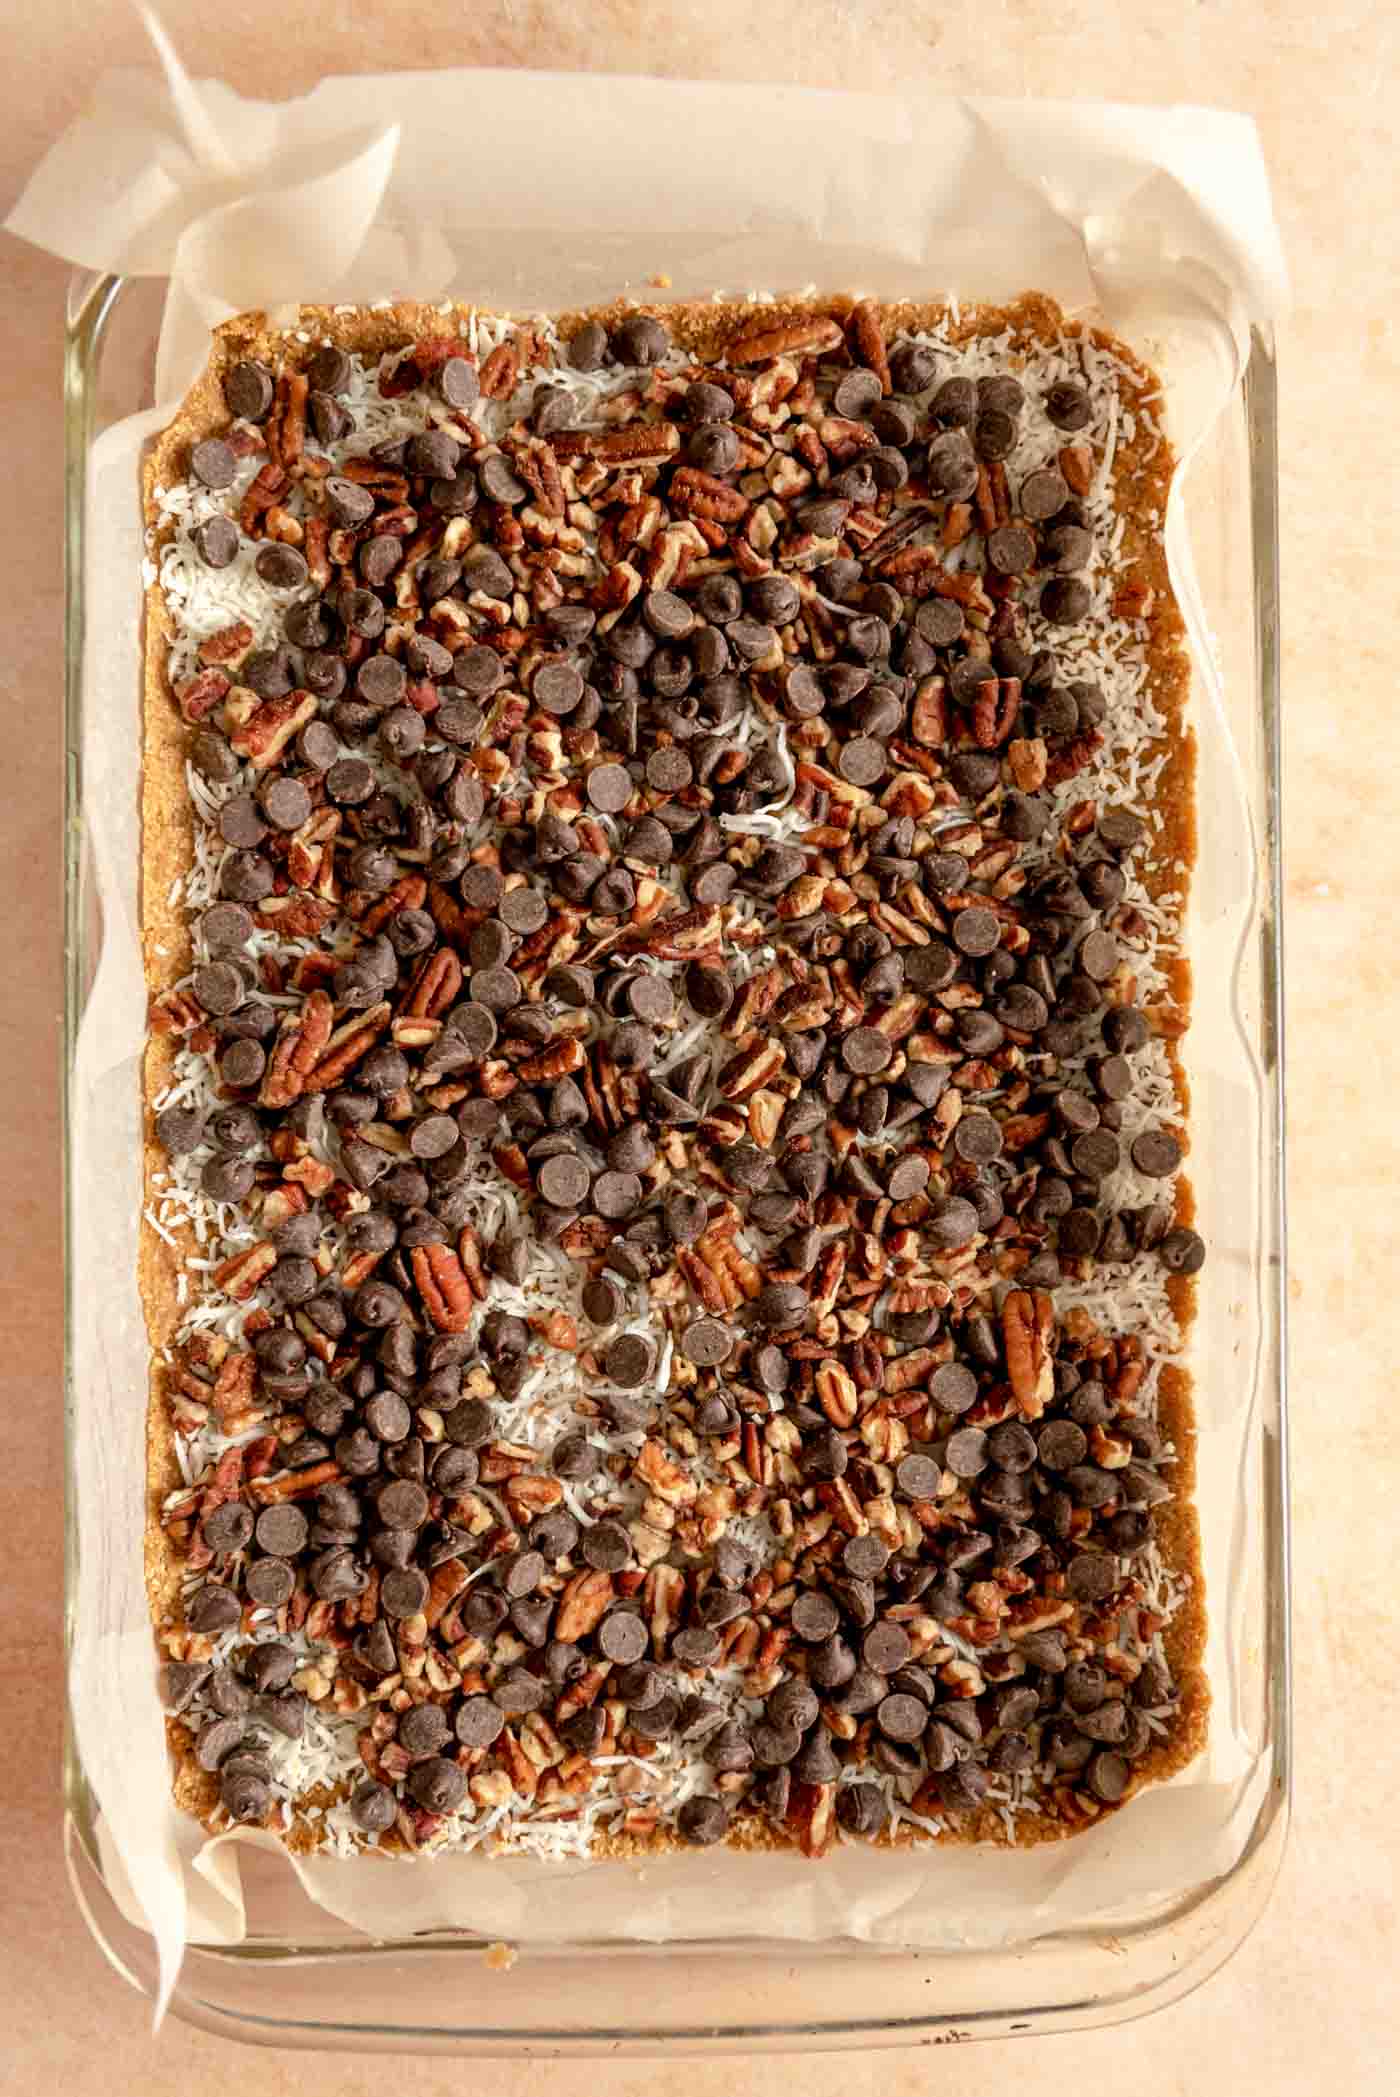 Chocolate chips, pecans and shredded coconut sprinkled over magic cookie bars in a 9x13-inch glass backing dish lined with parchment paper.